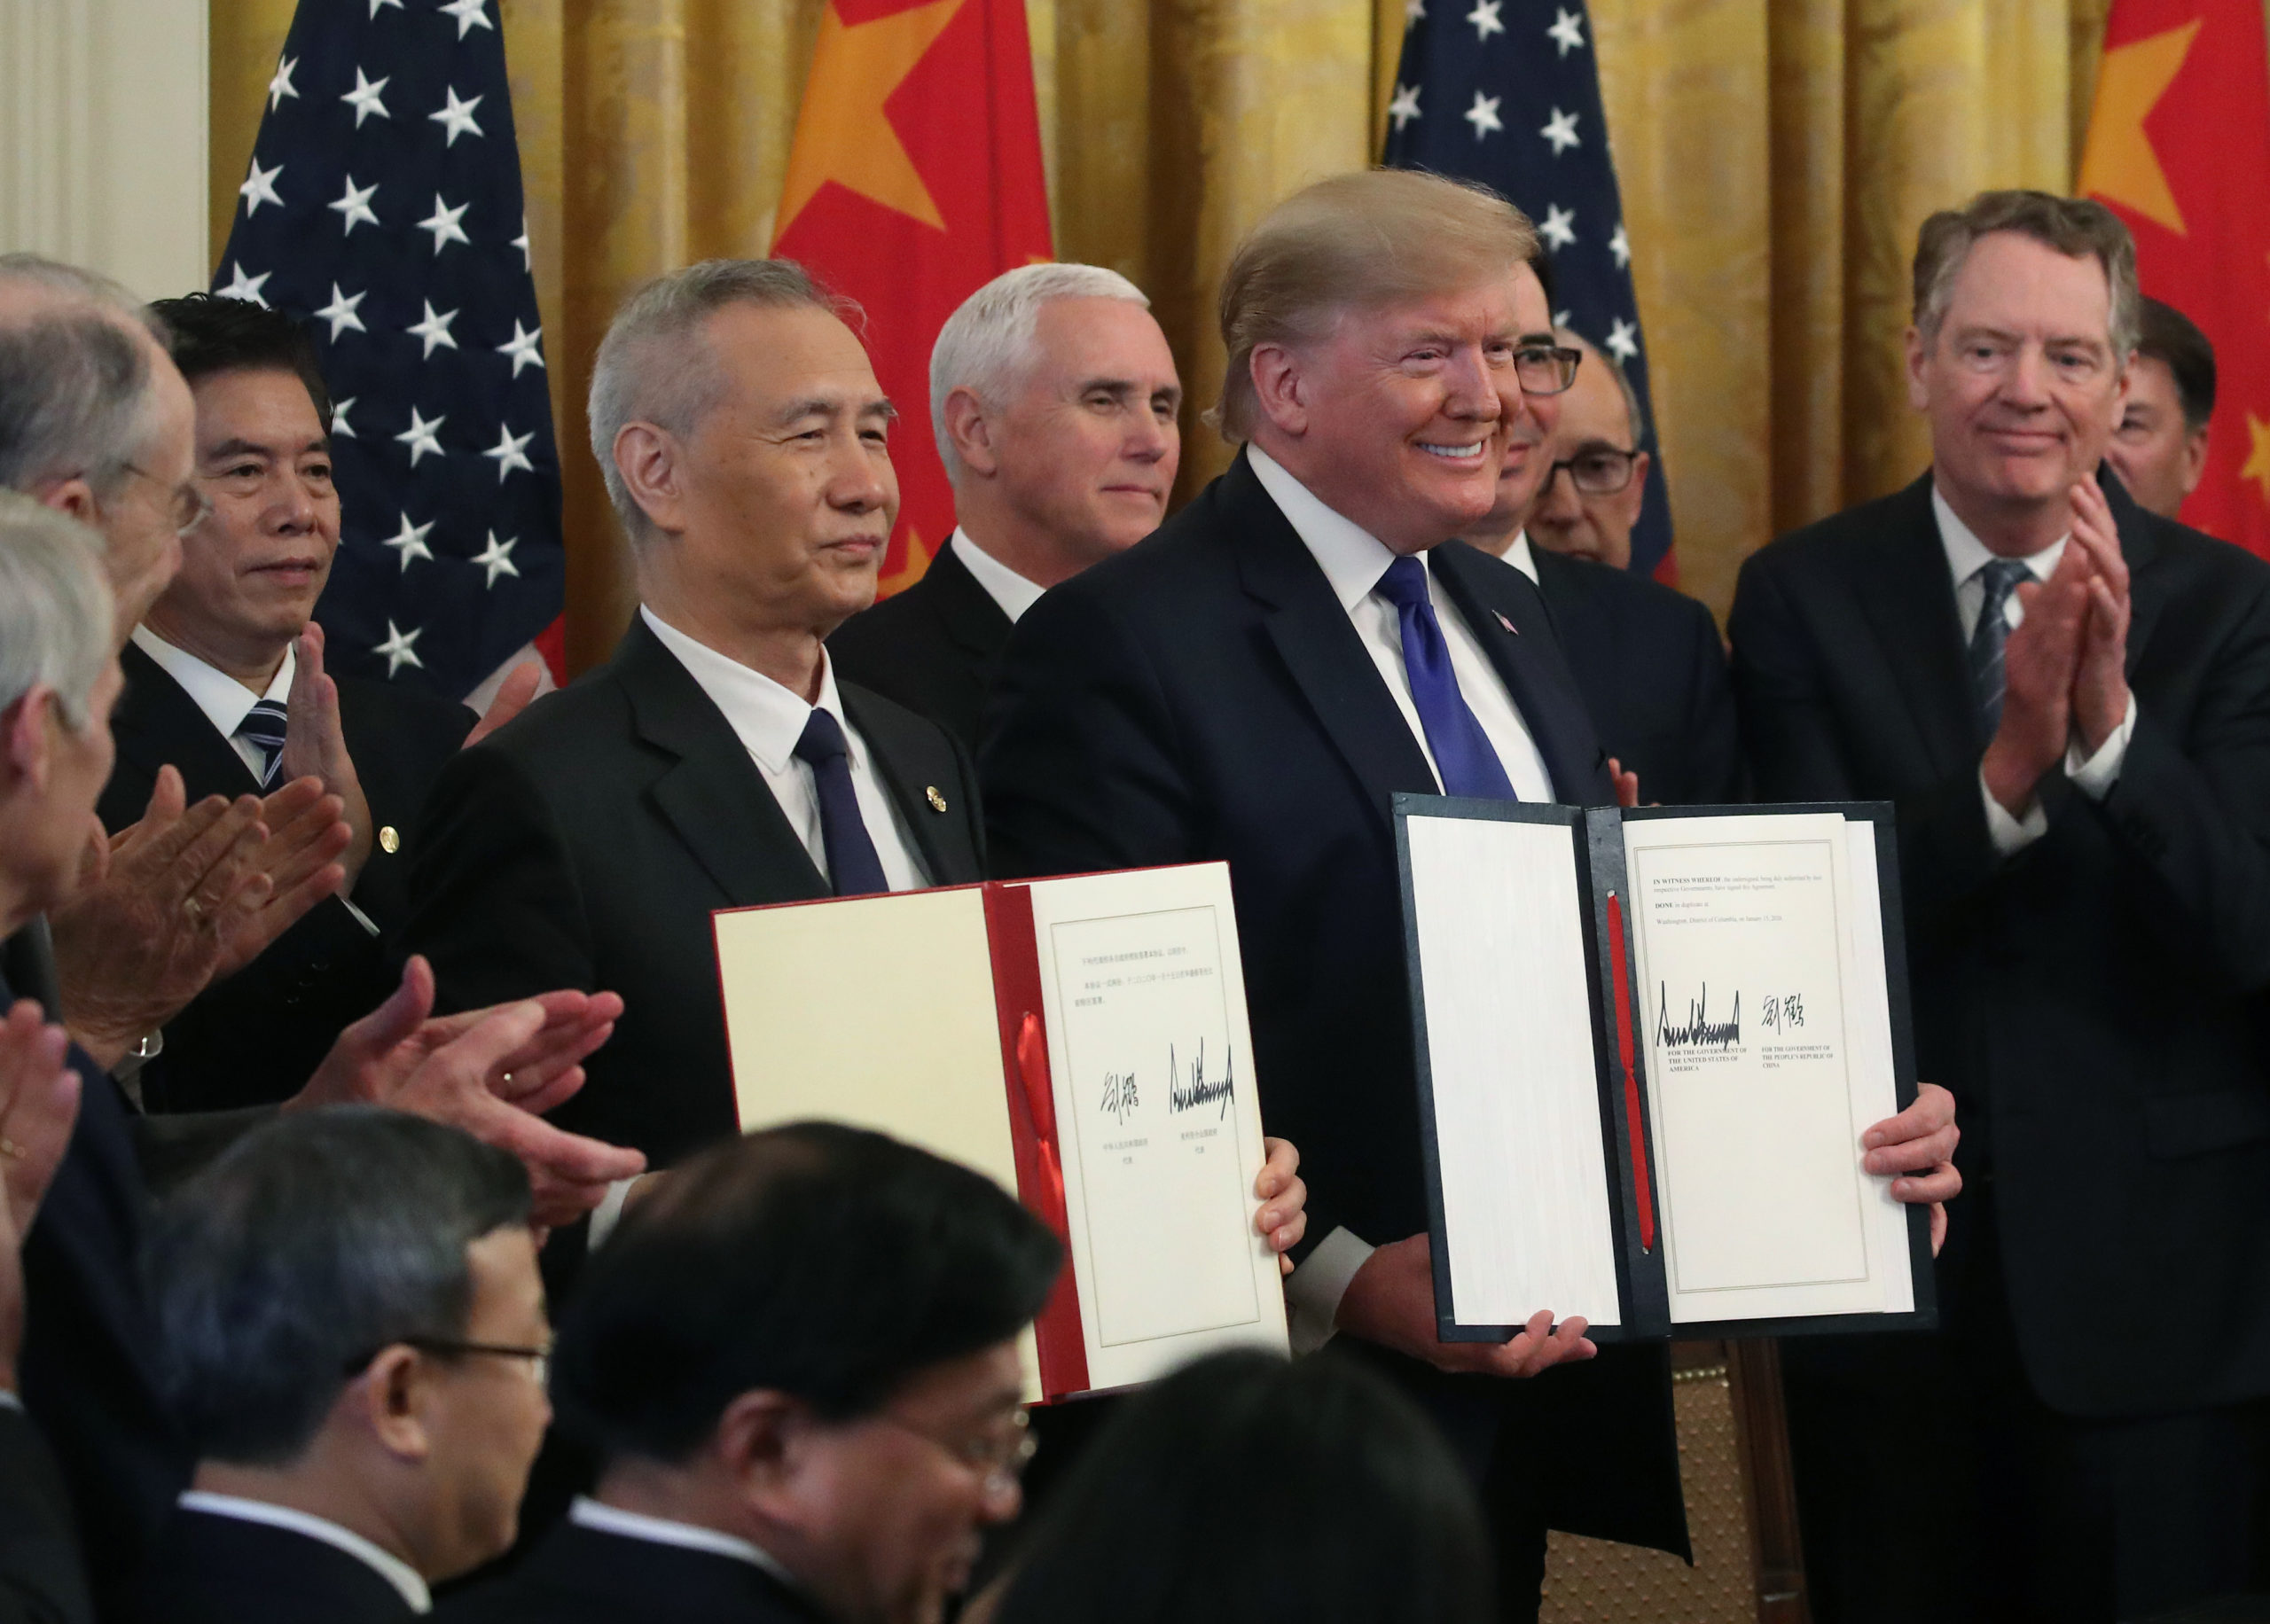 WASHINGTON, DC - JANUARY 15: U.S. President Donald Trump and Chinese Vice Premier Liu He, hold up signed agreements of phase 1 of a trade deal between the U.S. and China, in the East Room at the White House, on January 15, 2020 in Washington, DC. Phase 1 is expected to cut tariffs and promote Chinese purchases of U.S. farm, and manufactured goods while addressing disputes over intellectual property. (Photo by Mark Wilson/Getty Images)